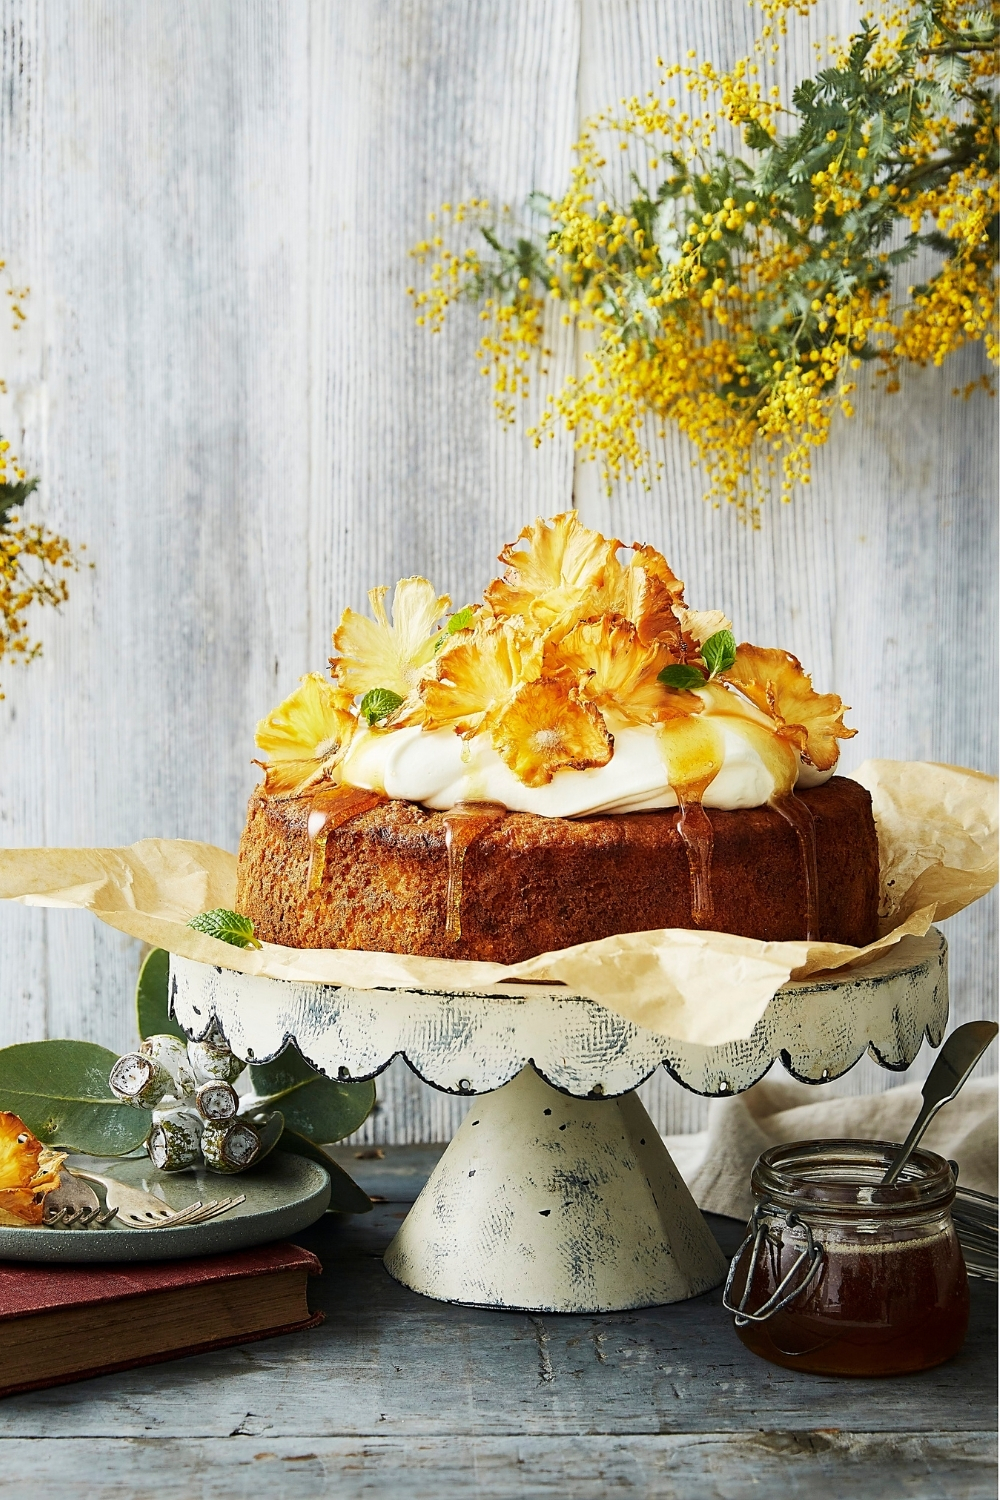 Autumn Spice Cake with Pineapple Flowers - The Kelly Kitchen